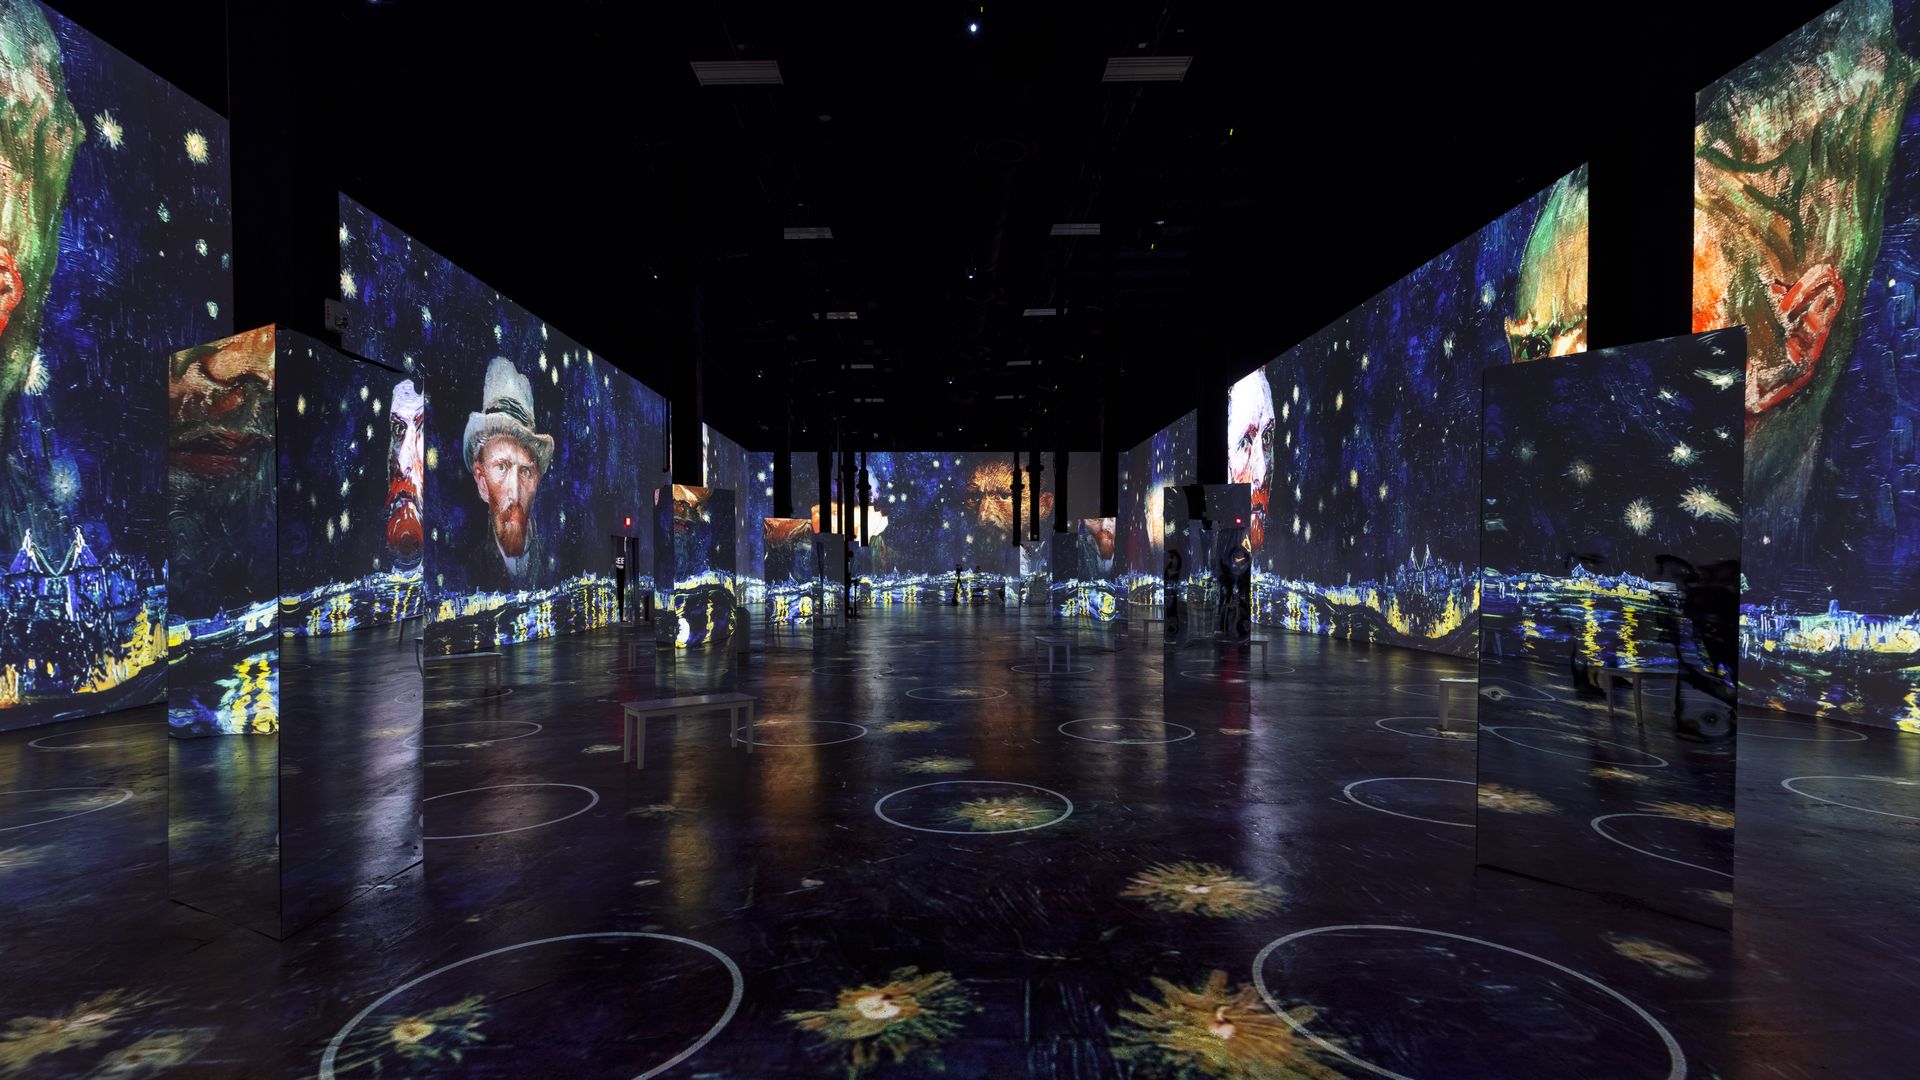 Silhouettes of people walk among projections of Vincent Van Gogh paintings on dark walls